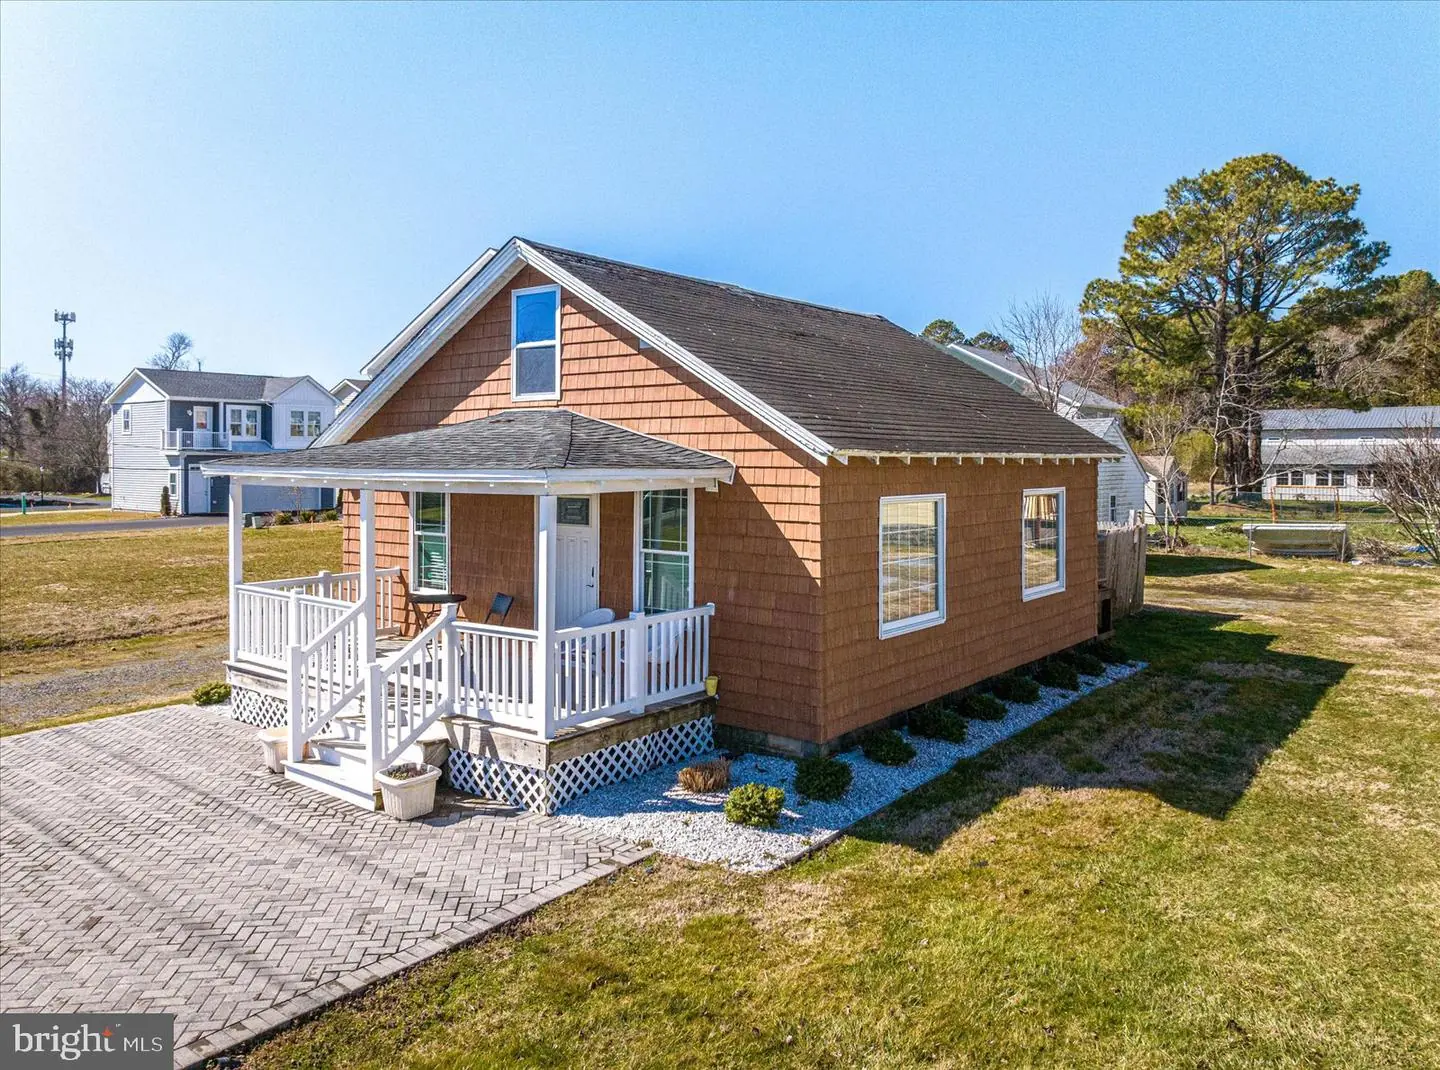 MDWO2019446-802902726122-2024-03-07-00-07-58 9801 / 9805 Golf Course Rd | Ocean City, MD Real Estate For Sale | MLS# Mdwo2019446  - 1st Choice Properties